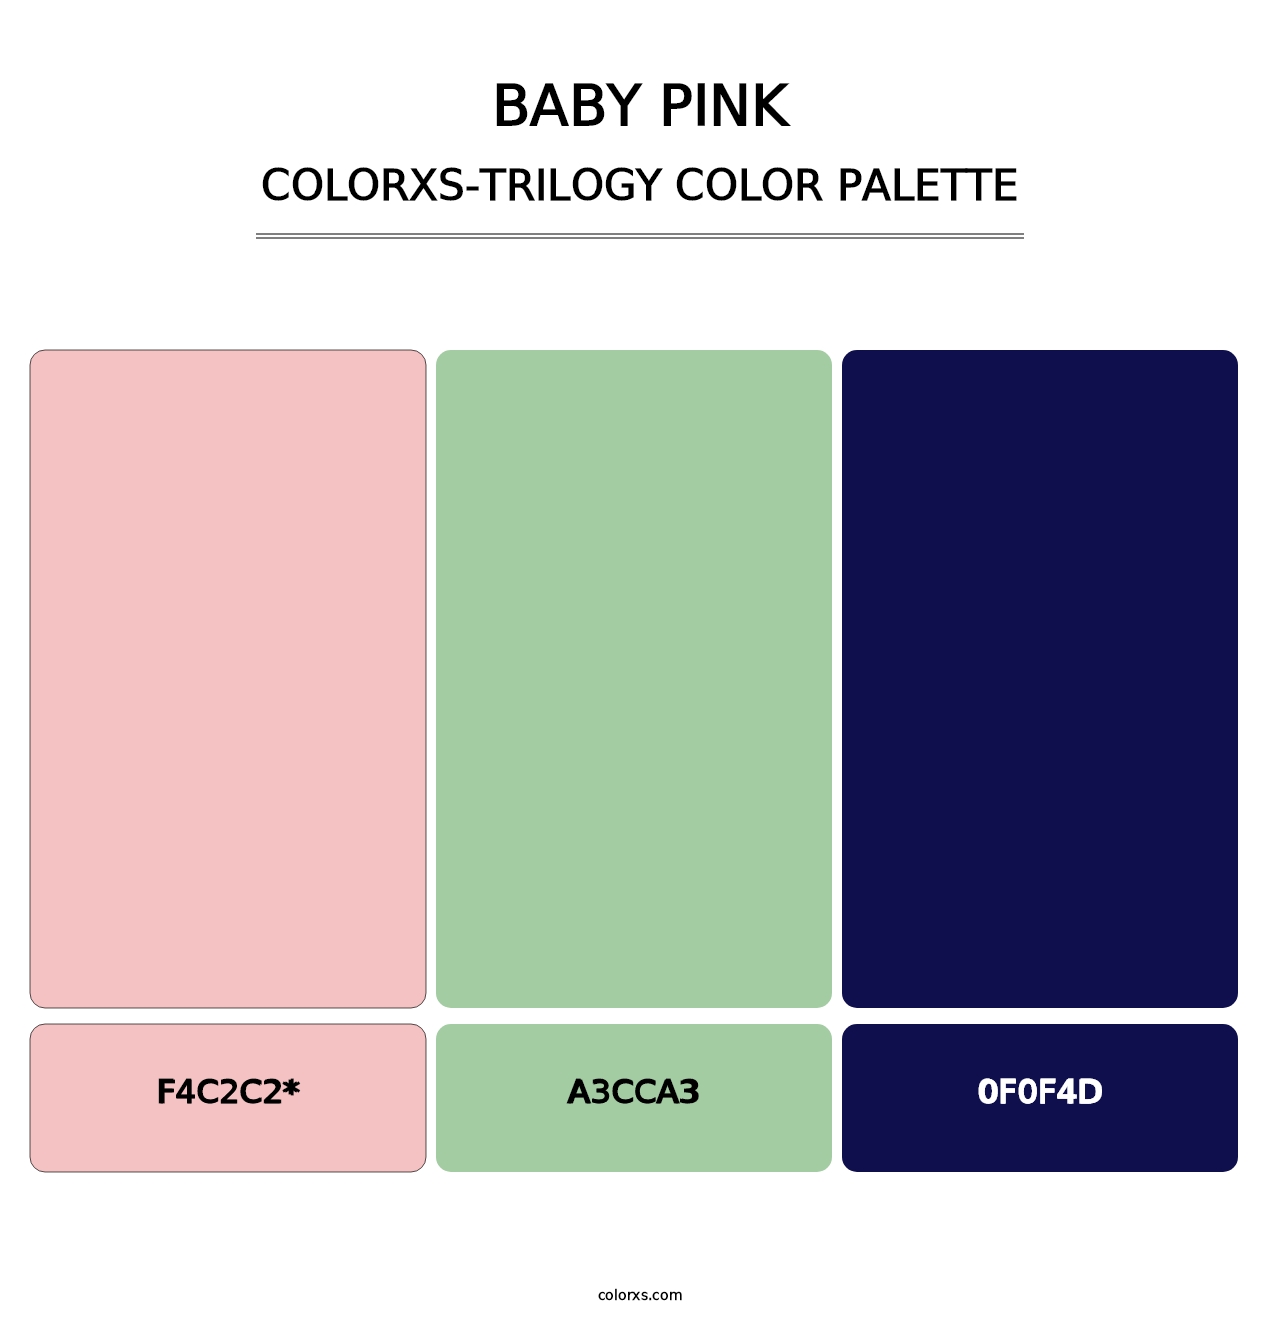 Baby Pink - Colorxs Trilogy Palette